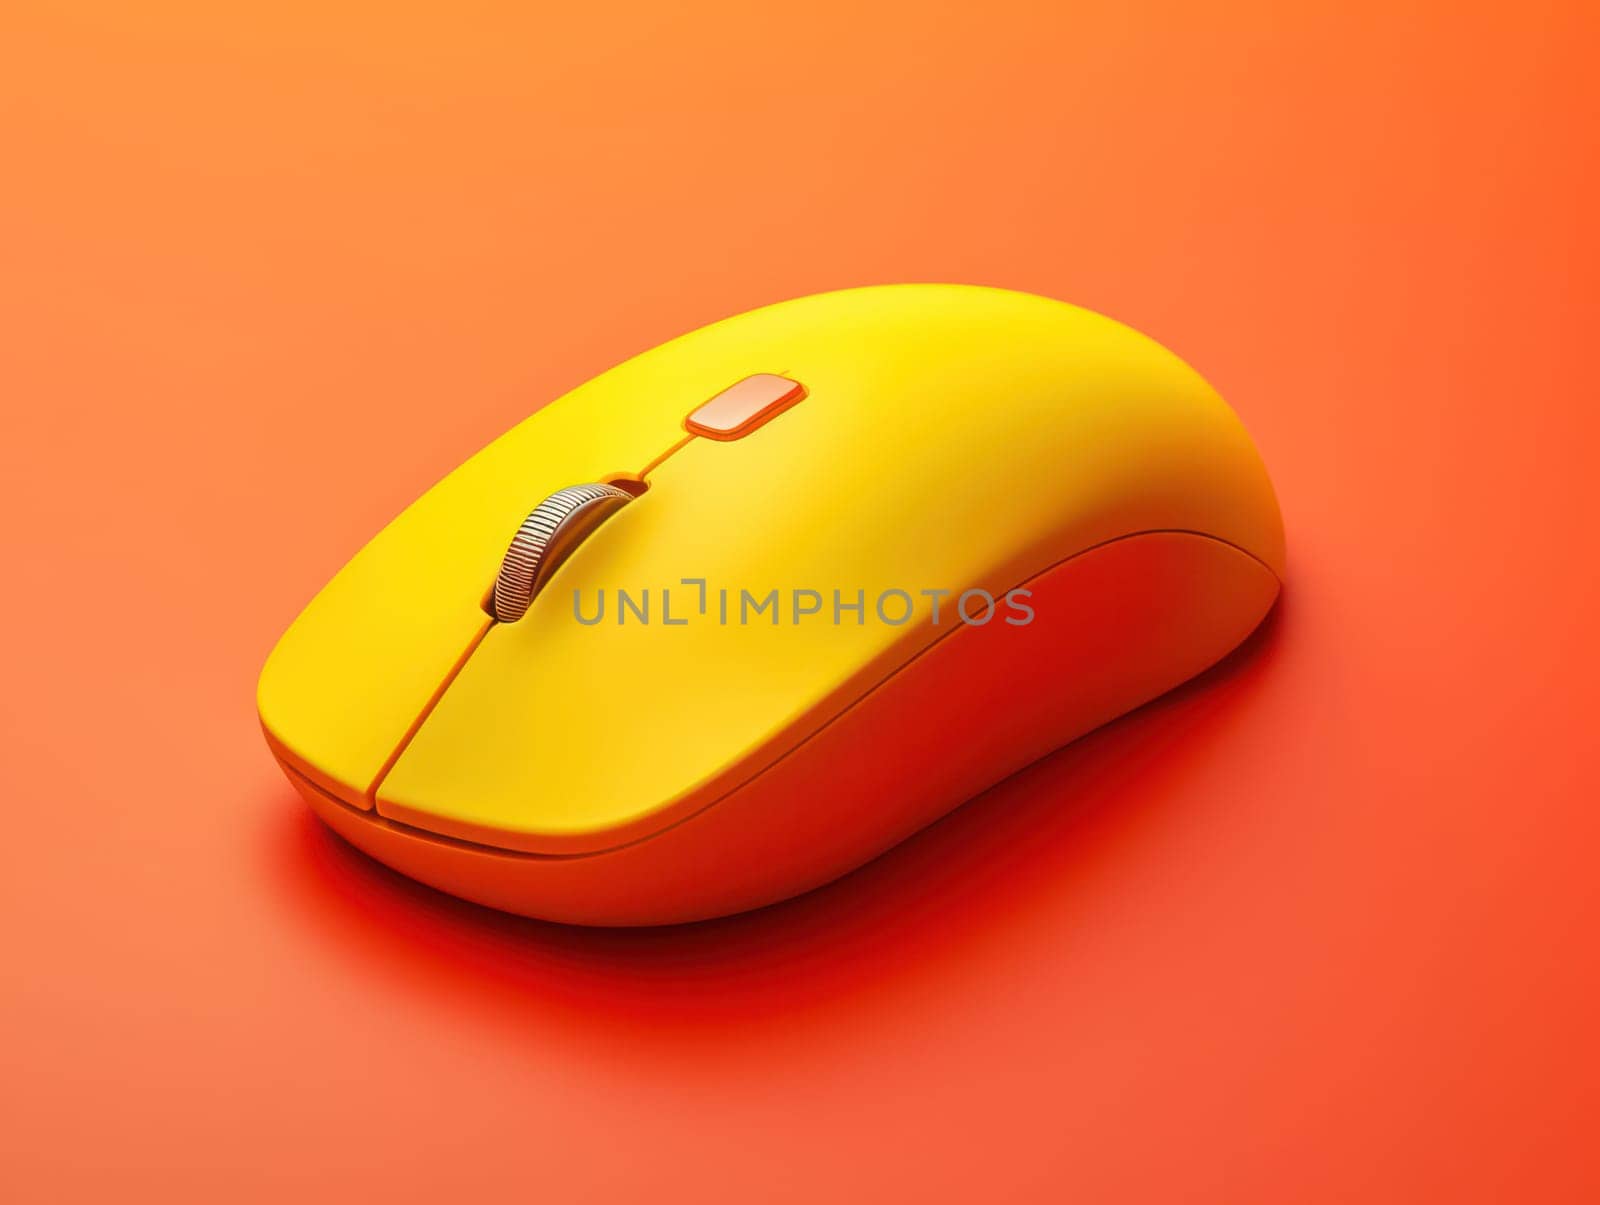 Modern Office Equipment: Minimalistic Wireless Computer Mouse in Gray, with Blue Optical Button and Scroll Wheel, on White Background by Vichizh